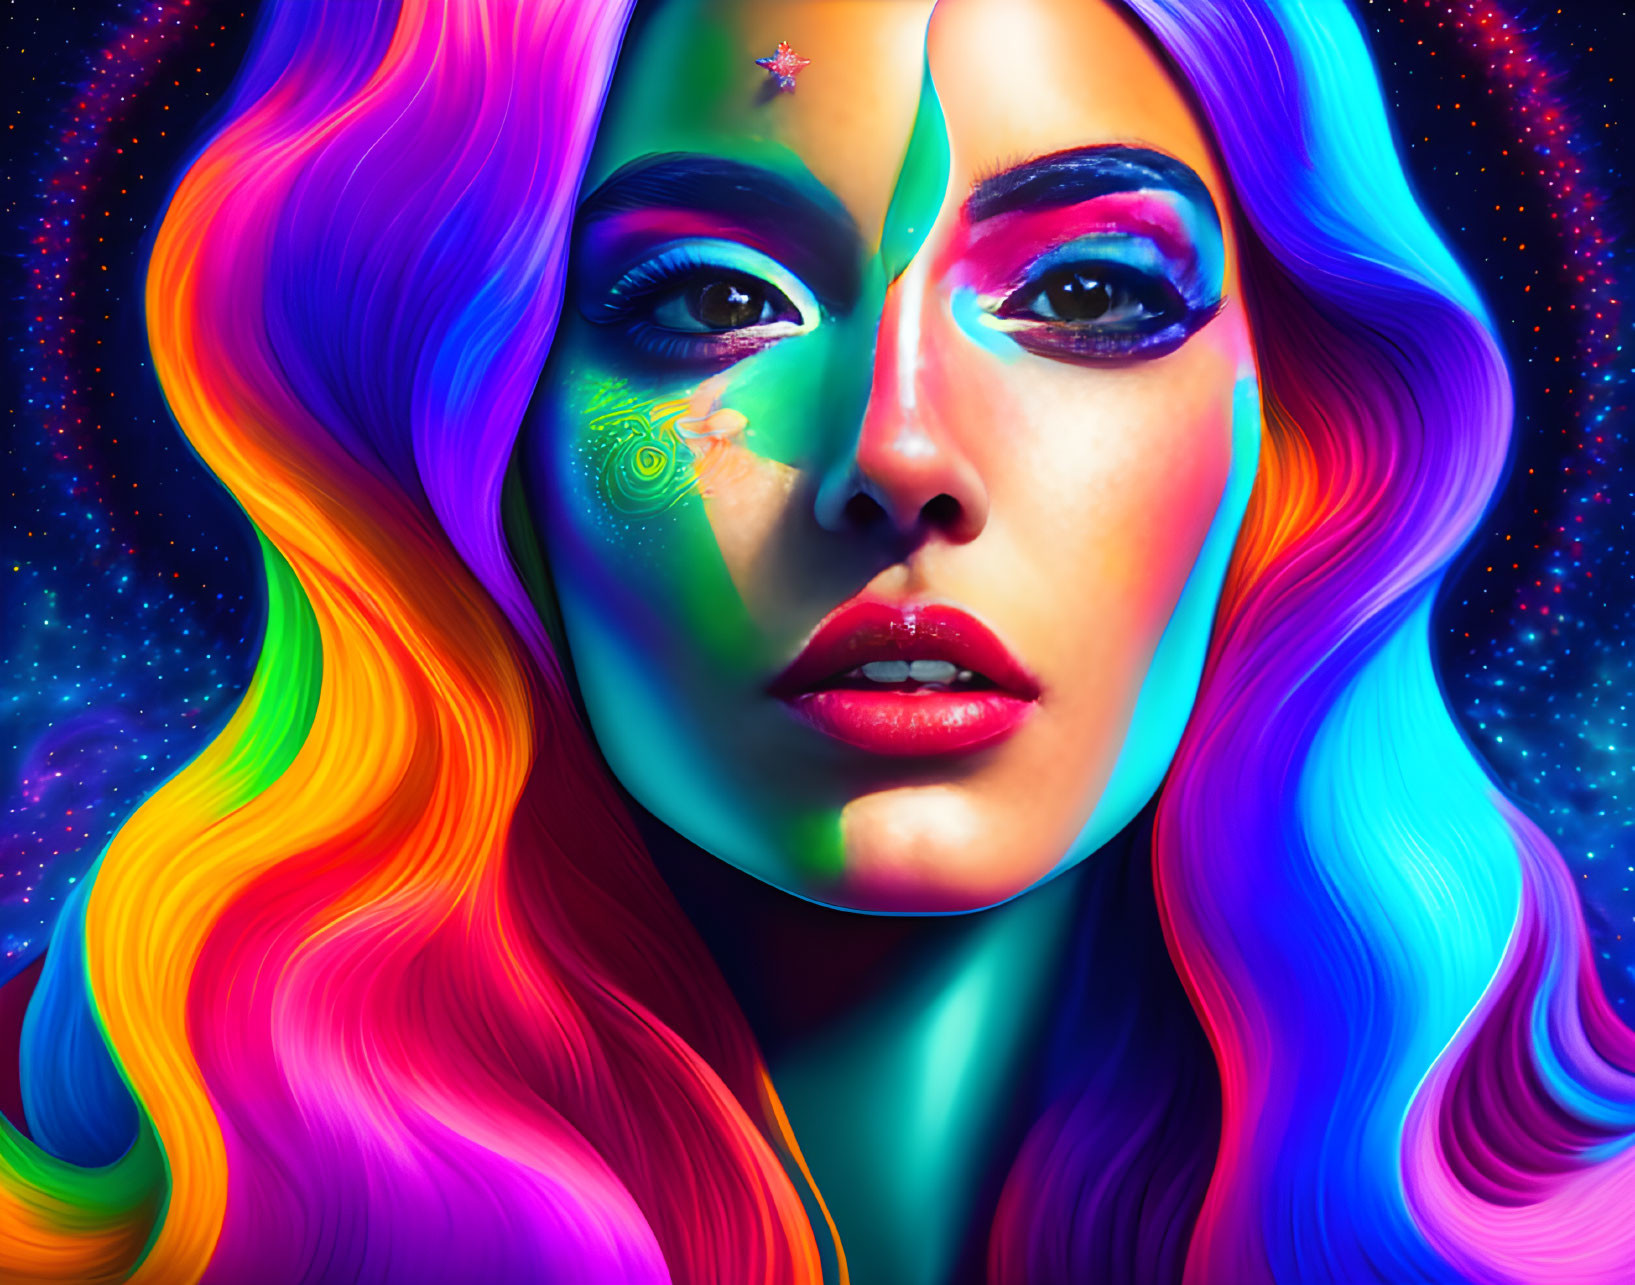 Colorful portrait of woman with glowing makeup and multicolored hair on cosmic backdrop